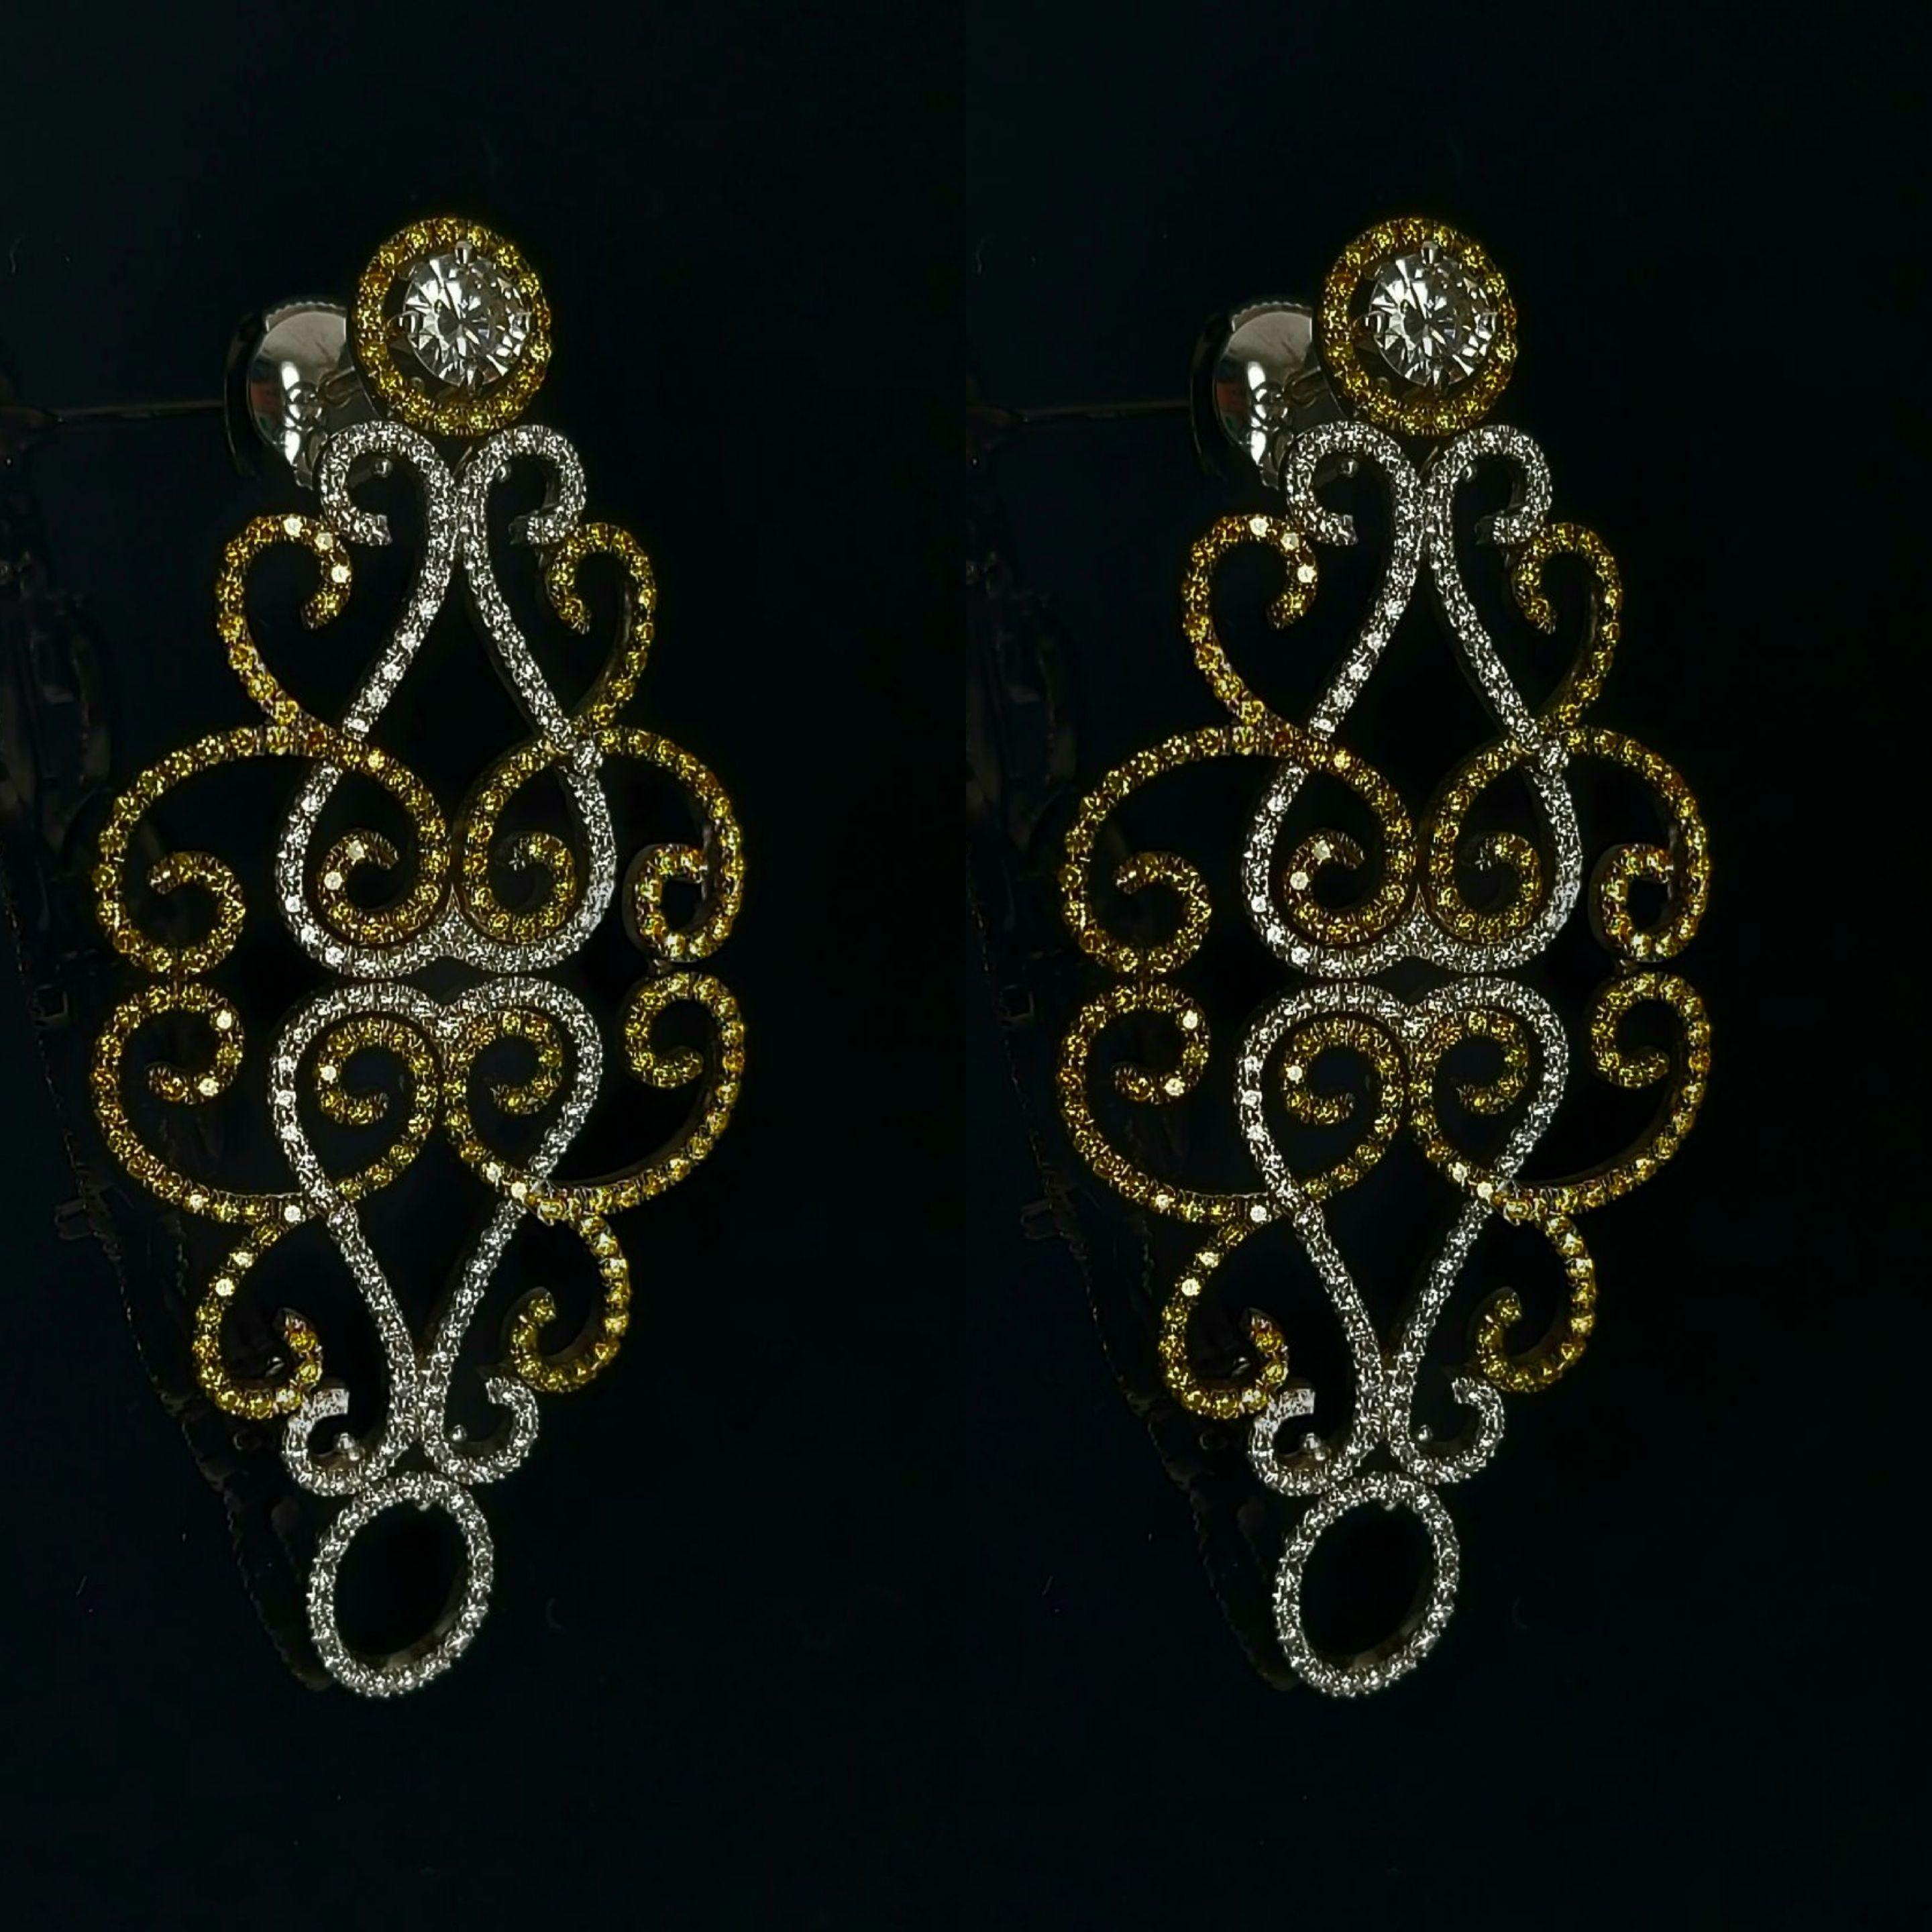 Very elegant 18 kt white gold chandelier earrings set with fancy yellow and white diamonds and one large solitaire diamond. 

Diamonds: Yellow & white brilliant cut diamonds, together ca. 3.17 cts, large solitaire diamonds in the center 0.91